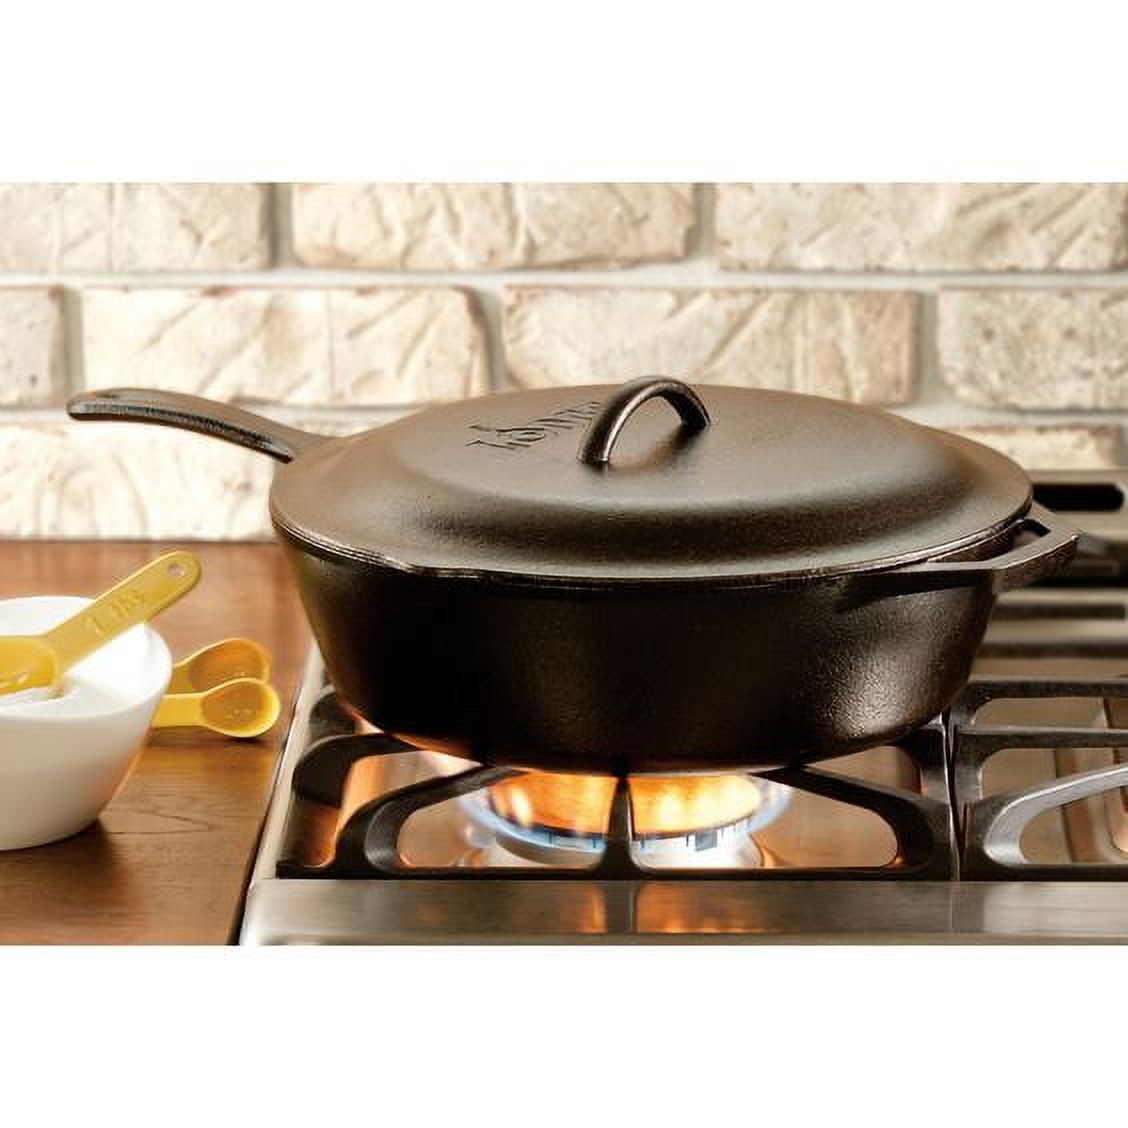 Lodge Cast Iron Pre-Seasoned Deep Skillet with Iron Cover and Assist Handle, 5 Quart, Black - image 4 of 8